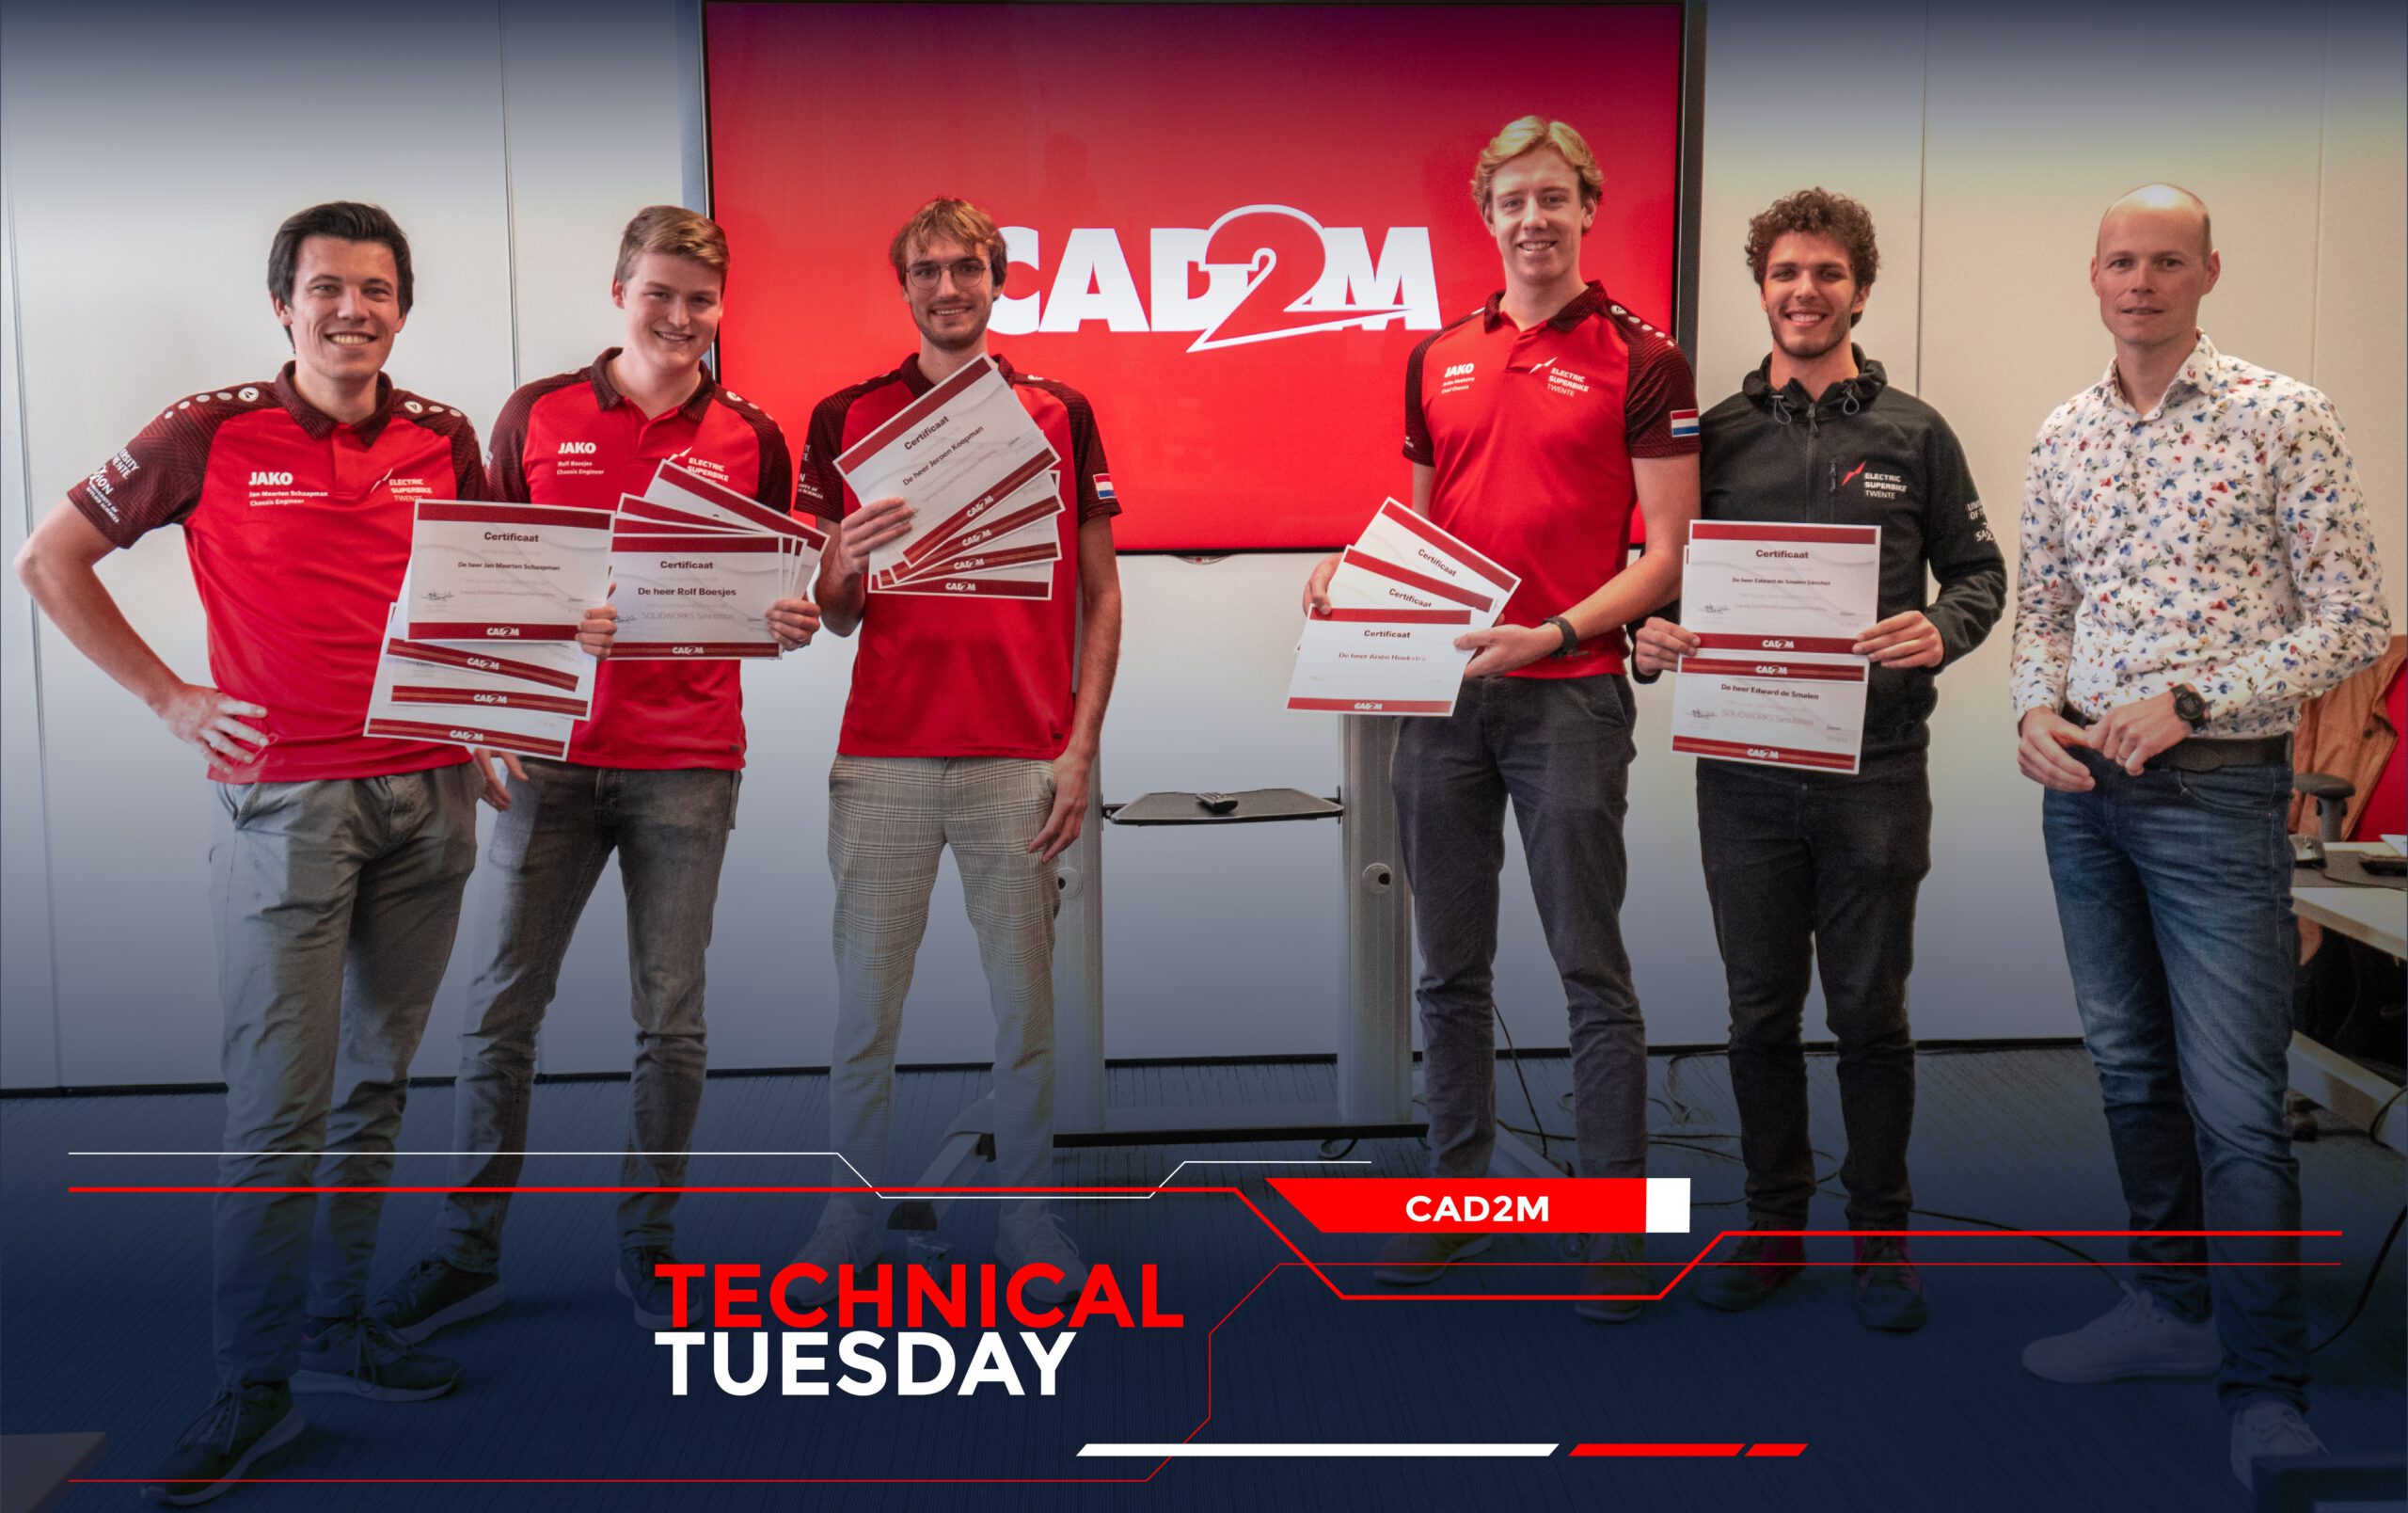 Technical Tuesday – CAD2M